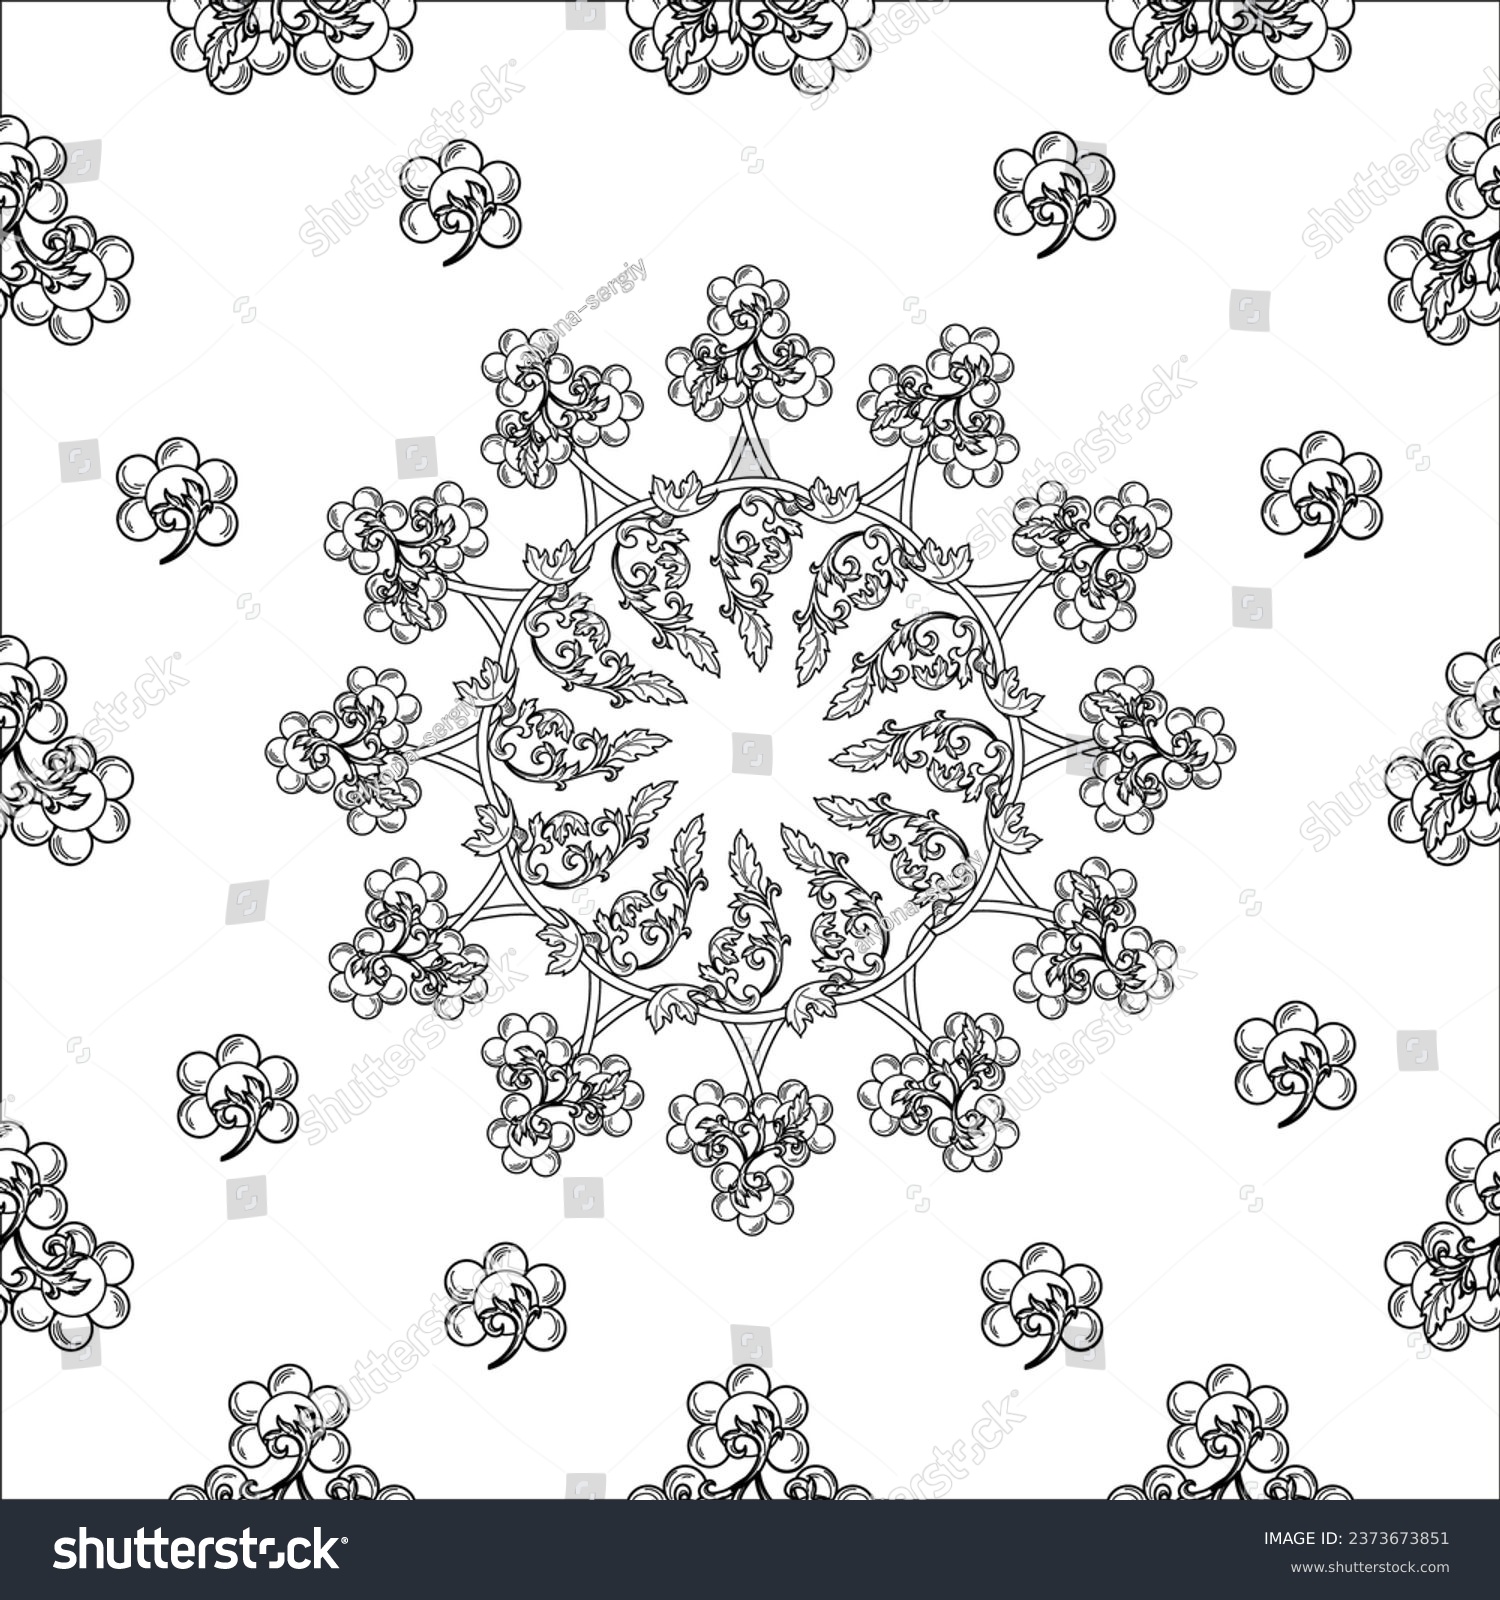 SVG of Beautiful and seamless concept. Abstract mandala pattern, blooming koleidoscope theme. Great for corporate, business and decoration svg